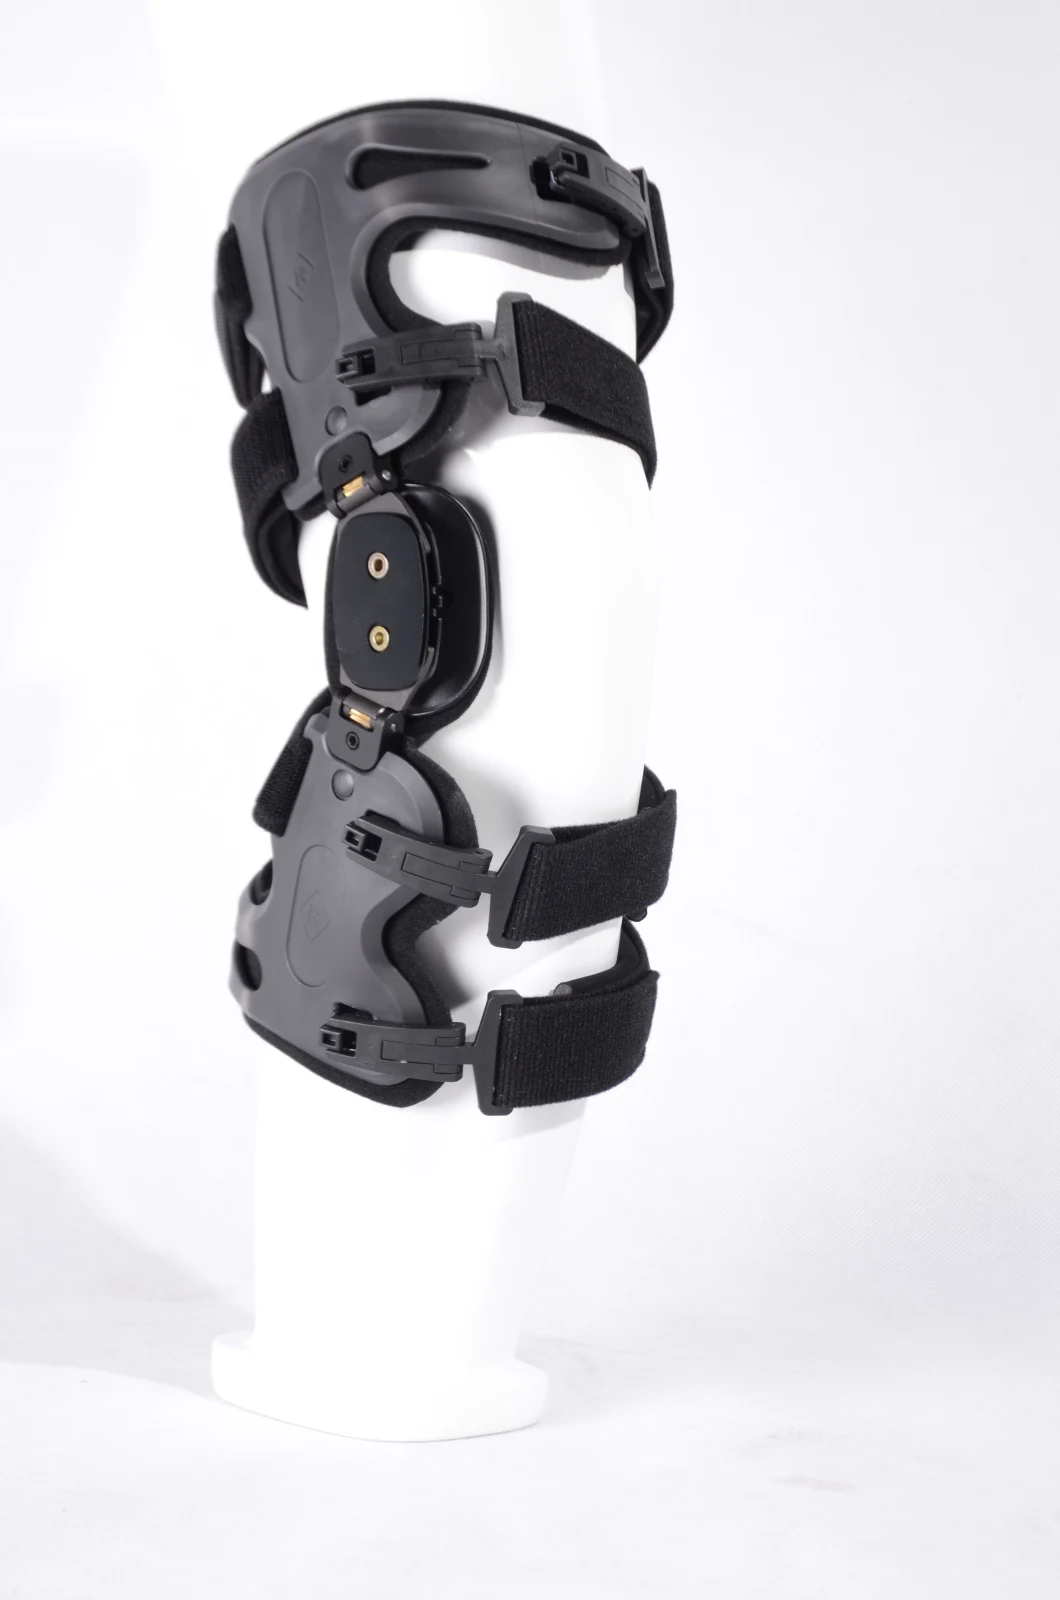 Medical Post-Op Knee Support / Orthopedic Angle Adjustable OA Knee Brace and Support